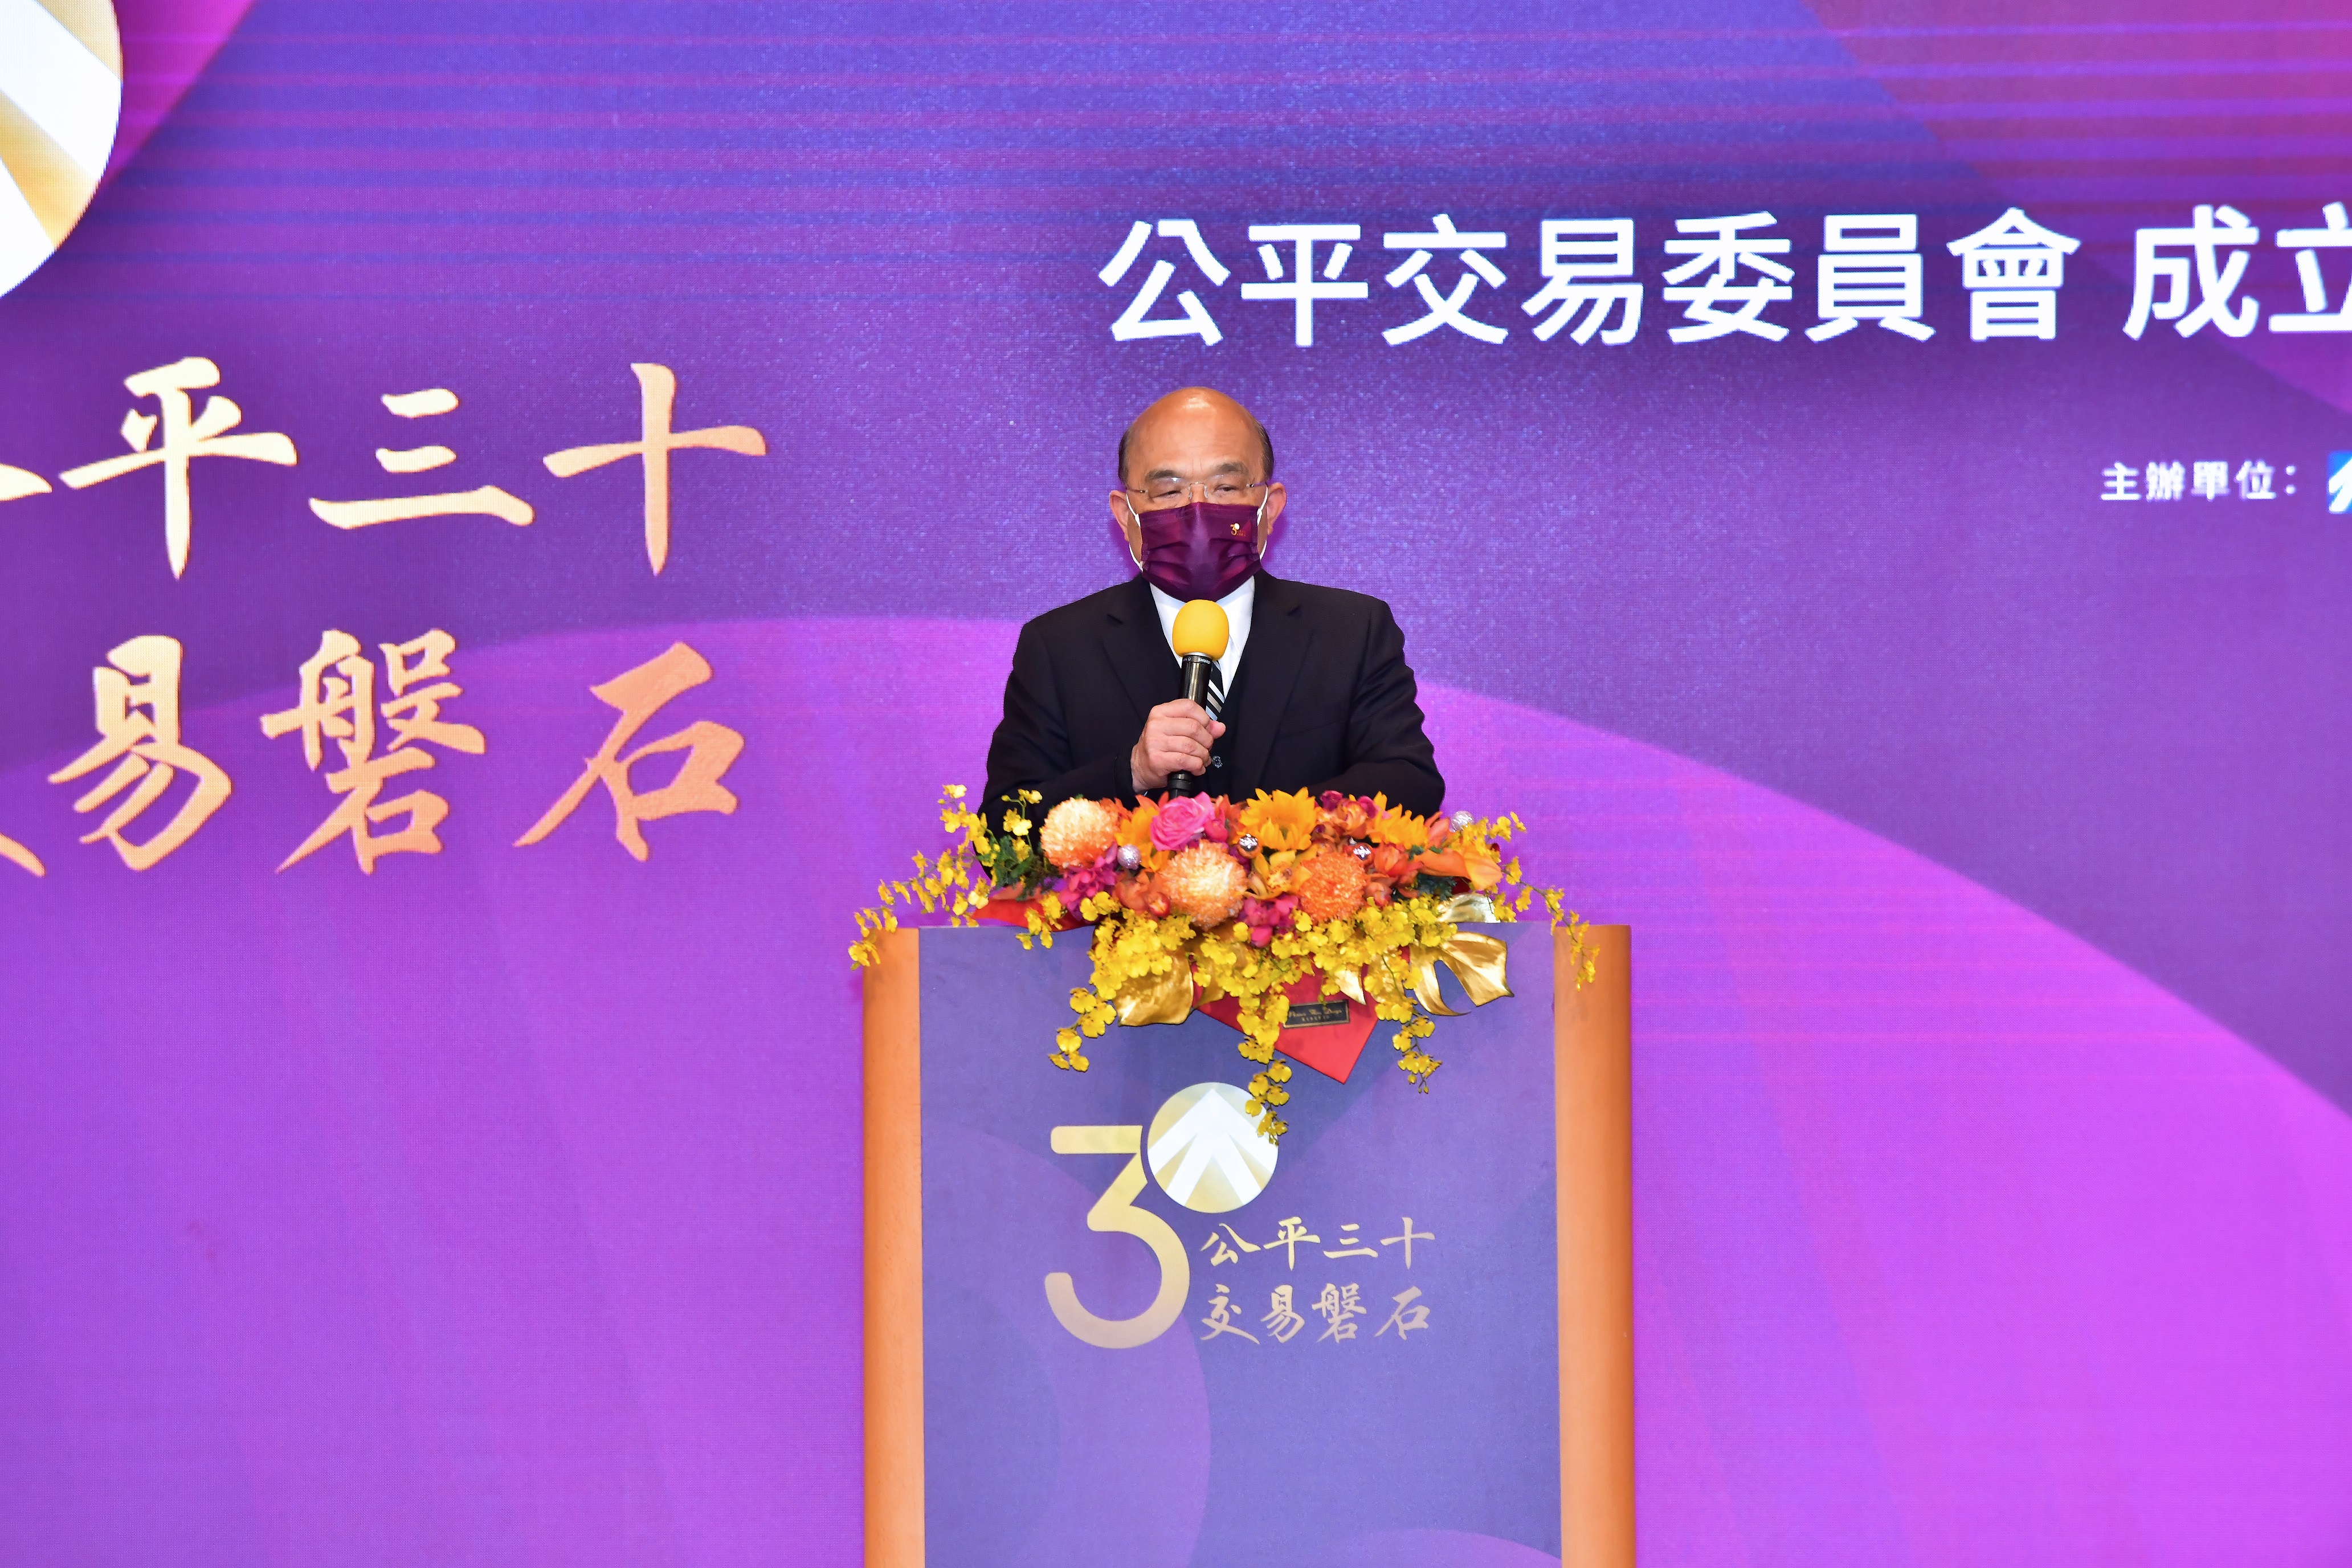 Premier Su Tseng-chang giving a speech during the FTC's 30th Anniversary